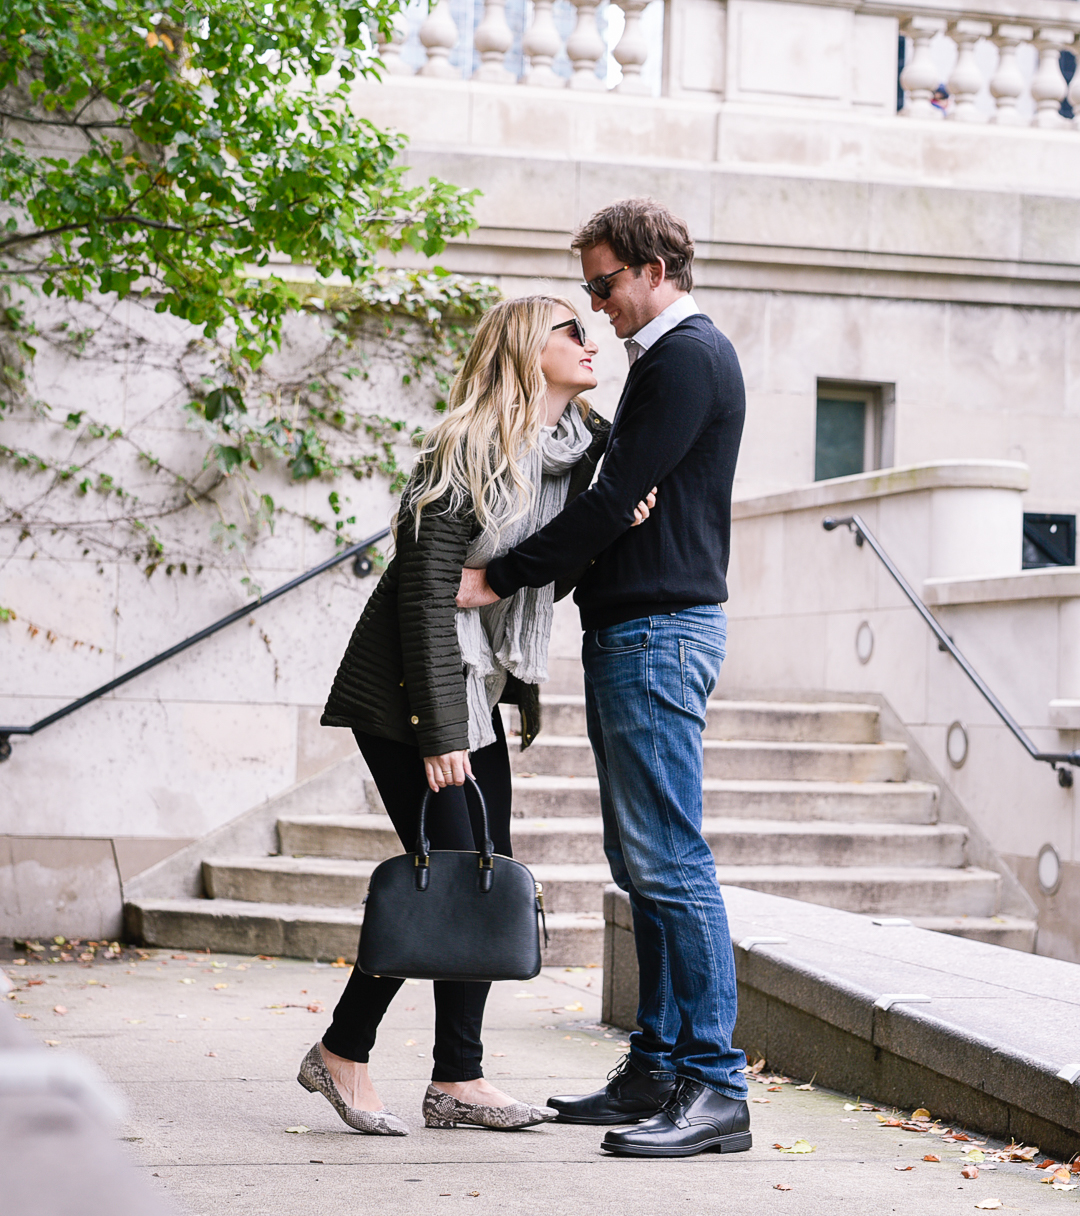 Jenna Colgrove and her husband in Rockport footwear at Chicago's Riverwalk. - Friday Five: 5 Winter Date Ideas by Chicago style blogger Visions of Vogue